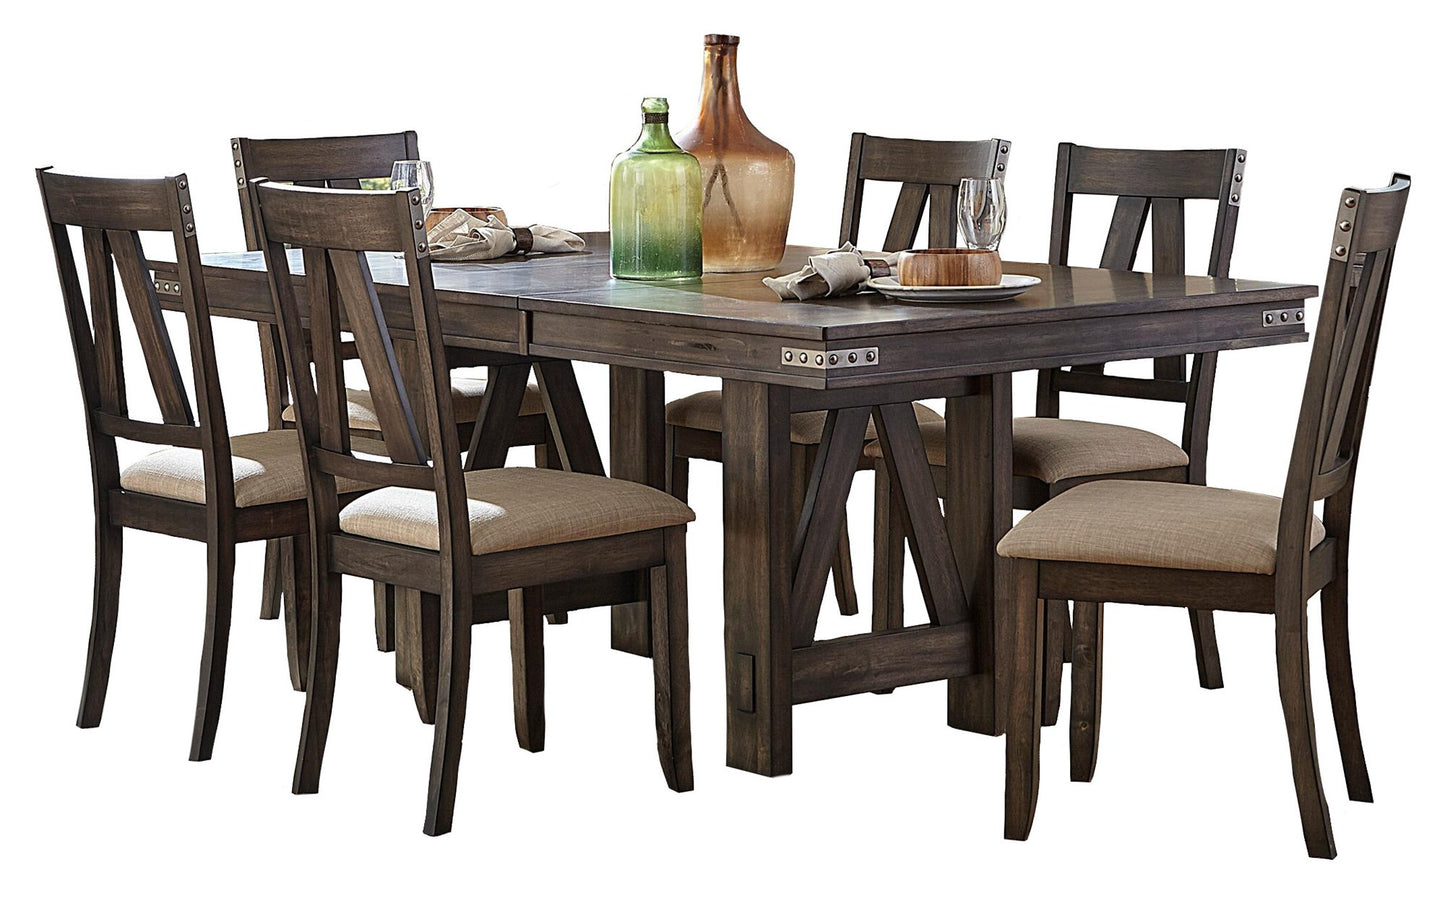 Homelegance Mattawa 7PC Dining Set Table, 6 Chair in Rustic Brown